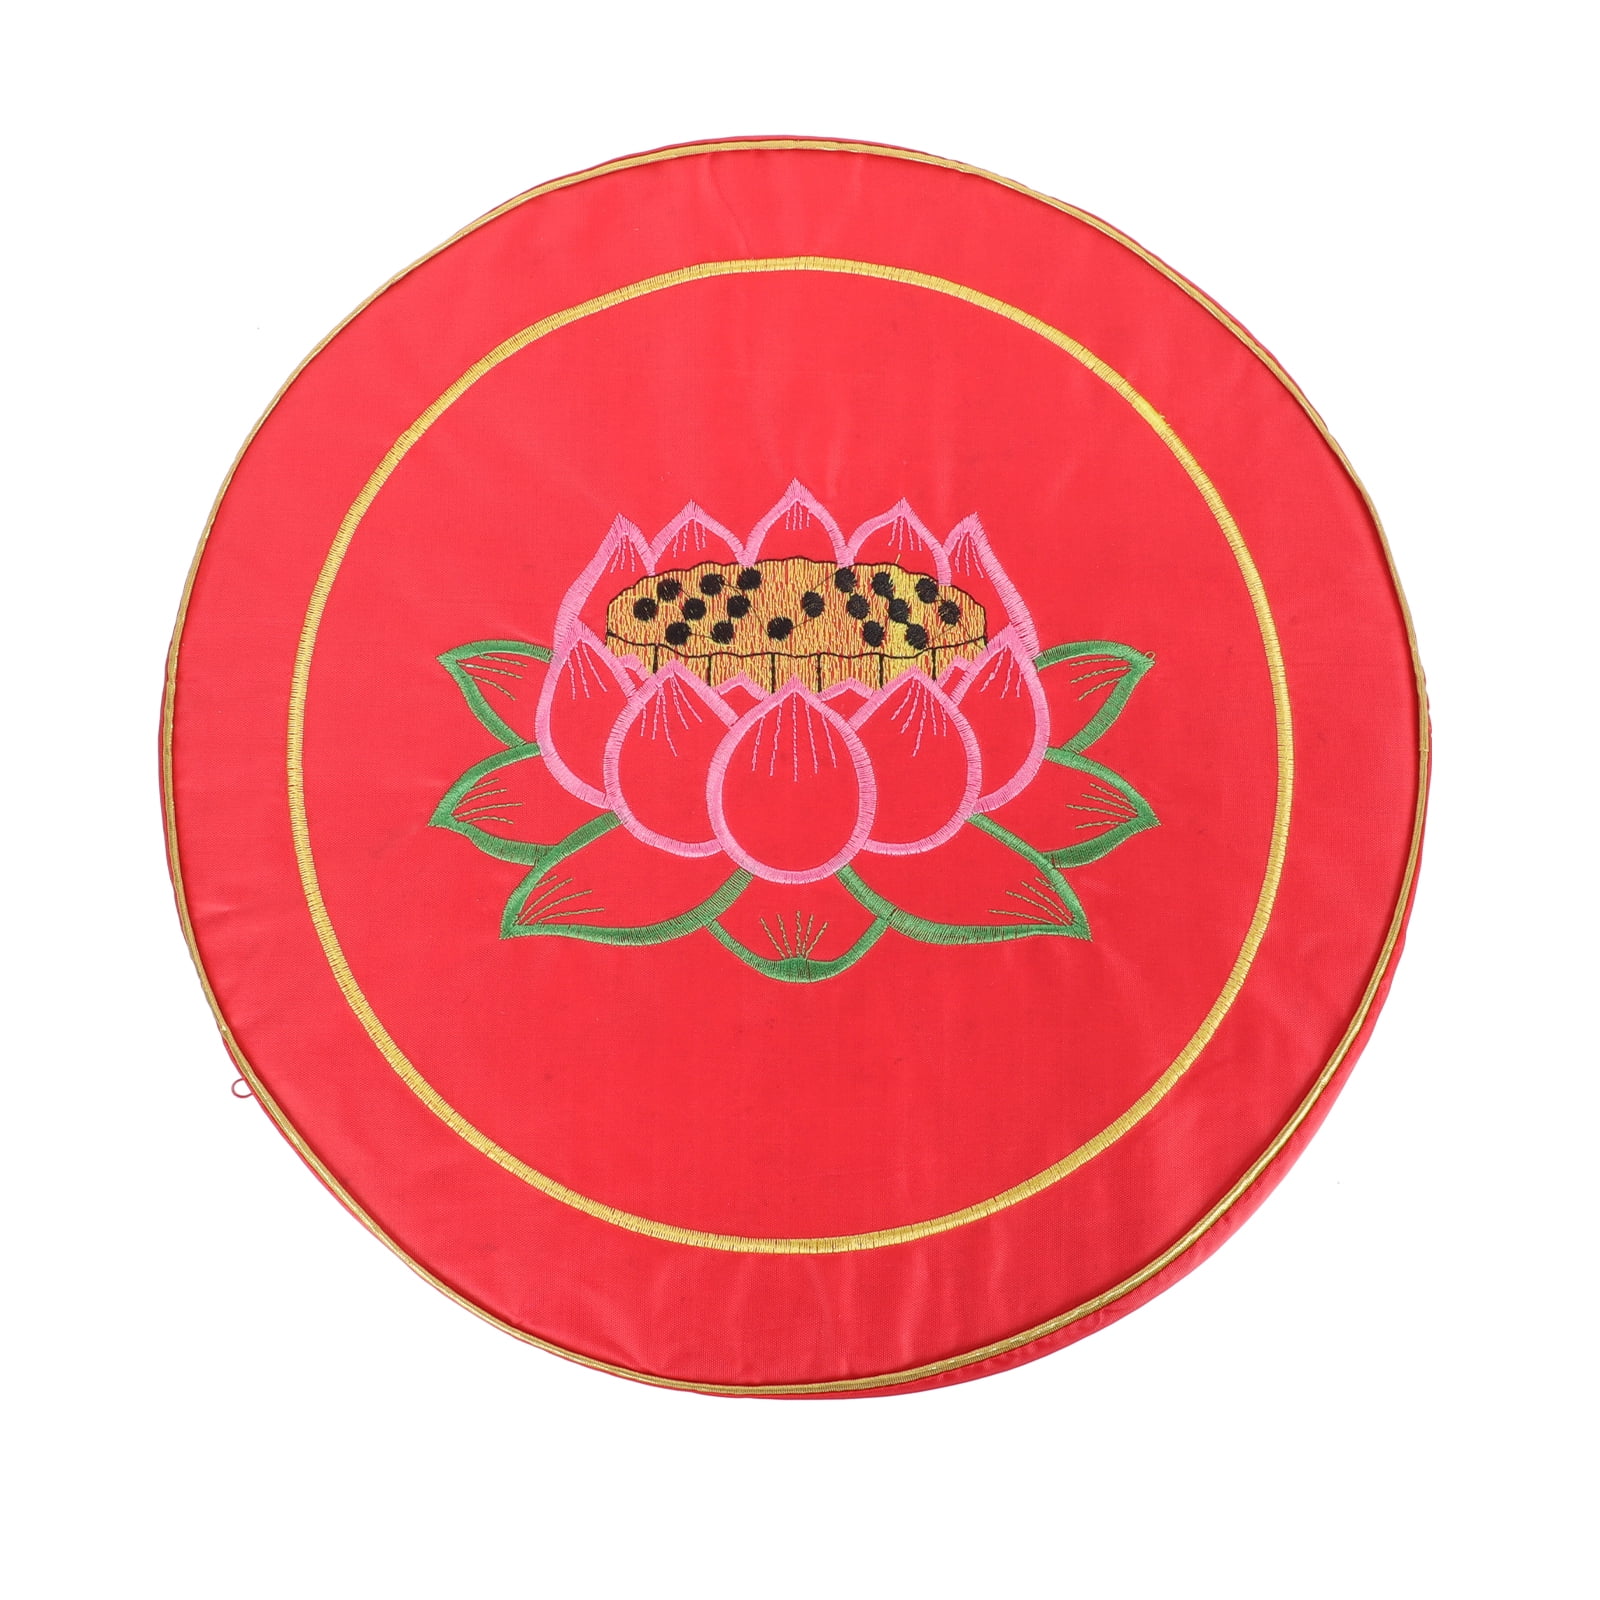 19" Round Embroidery lotus meditation cushions Buddhist supplies Free Shipping 